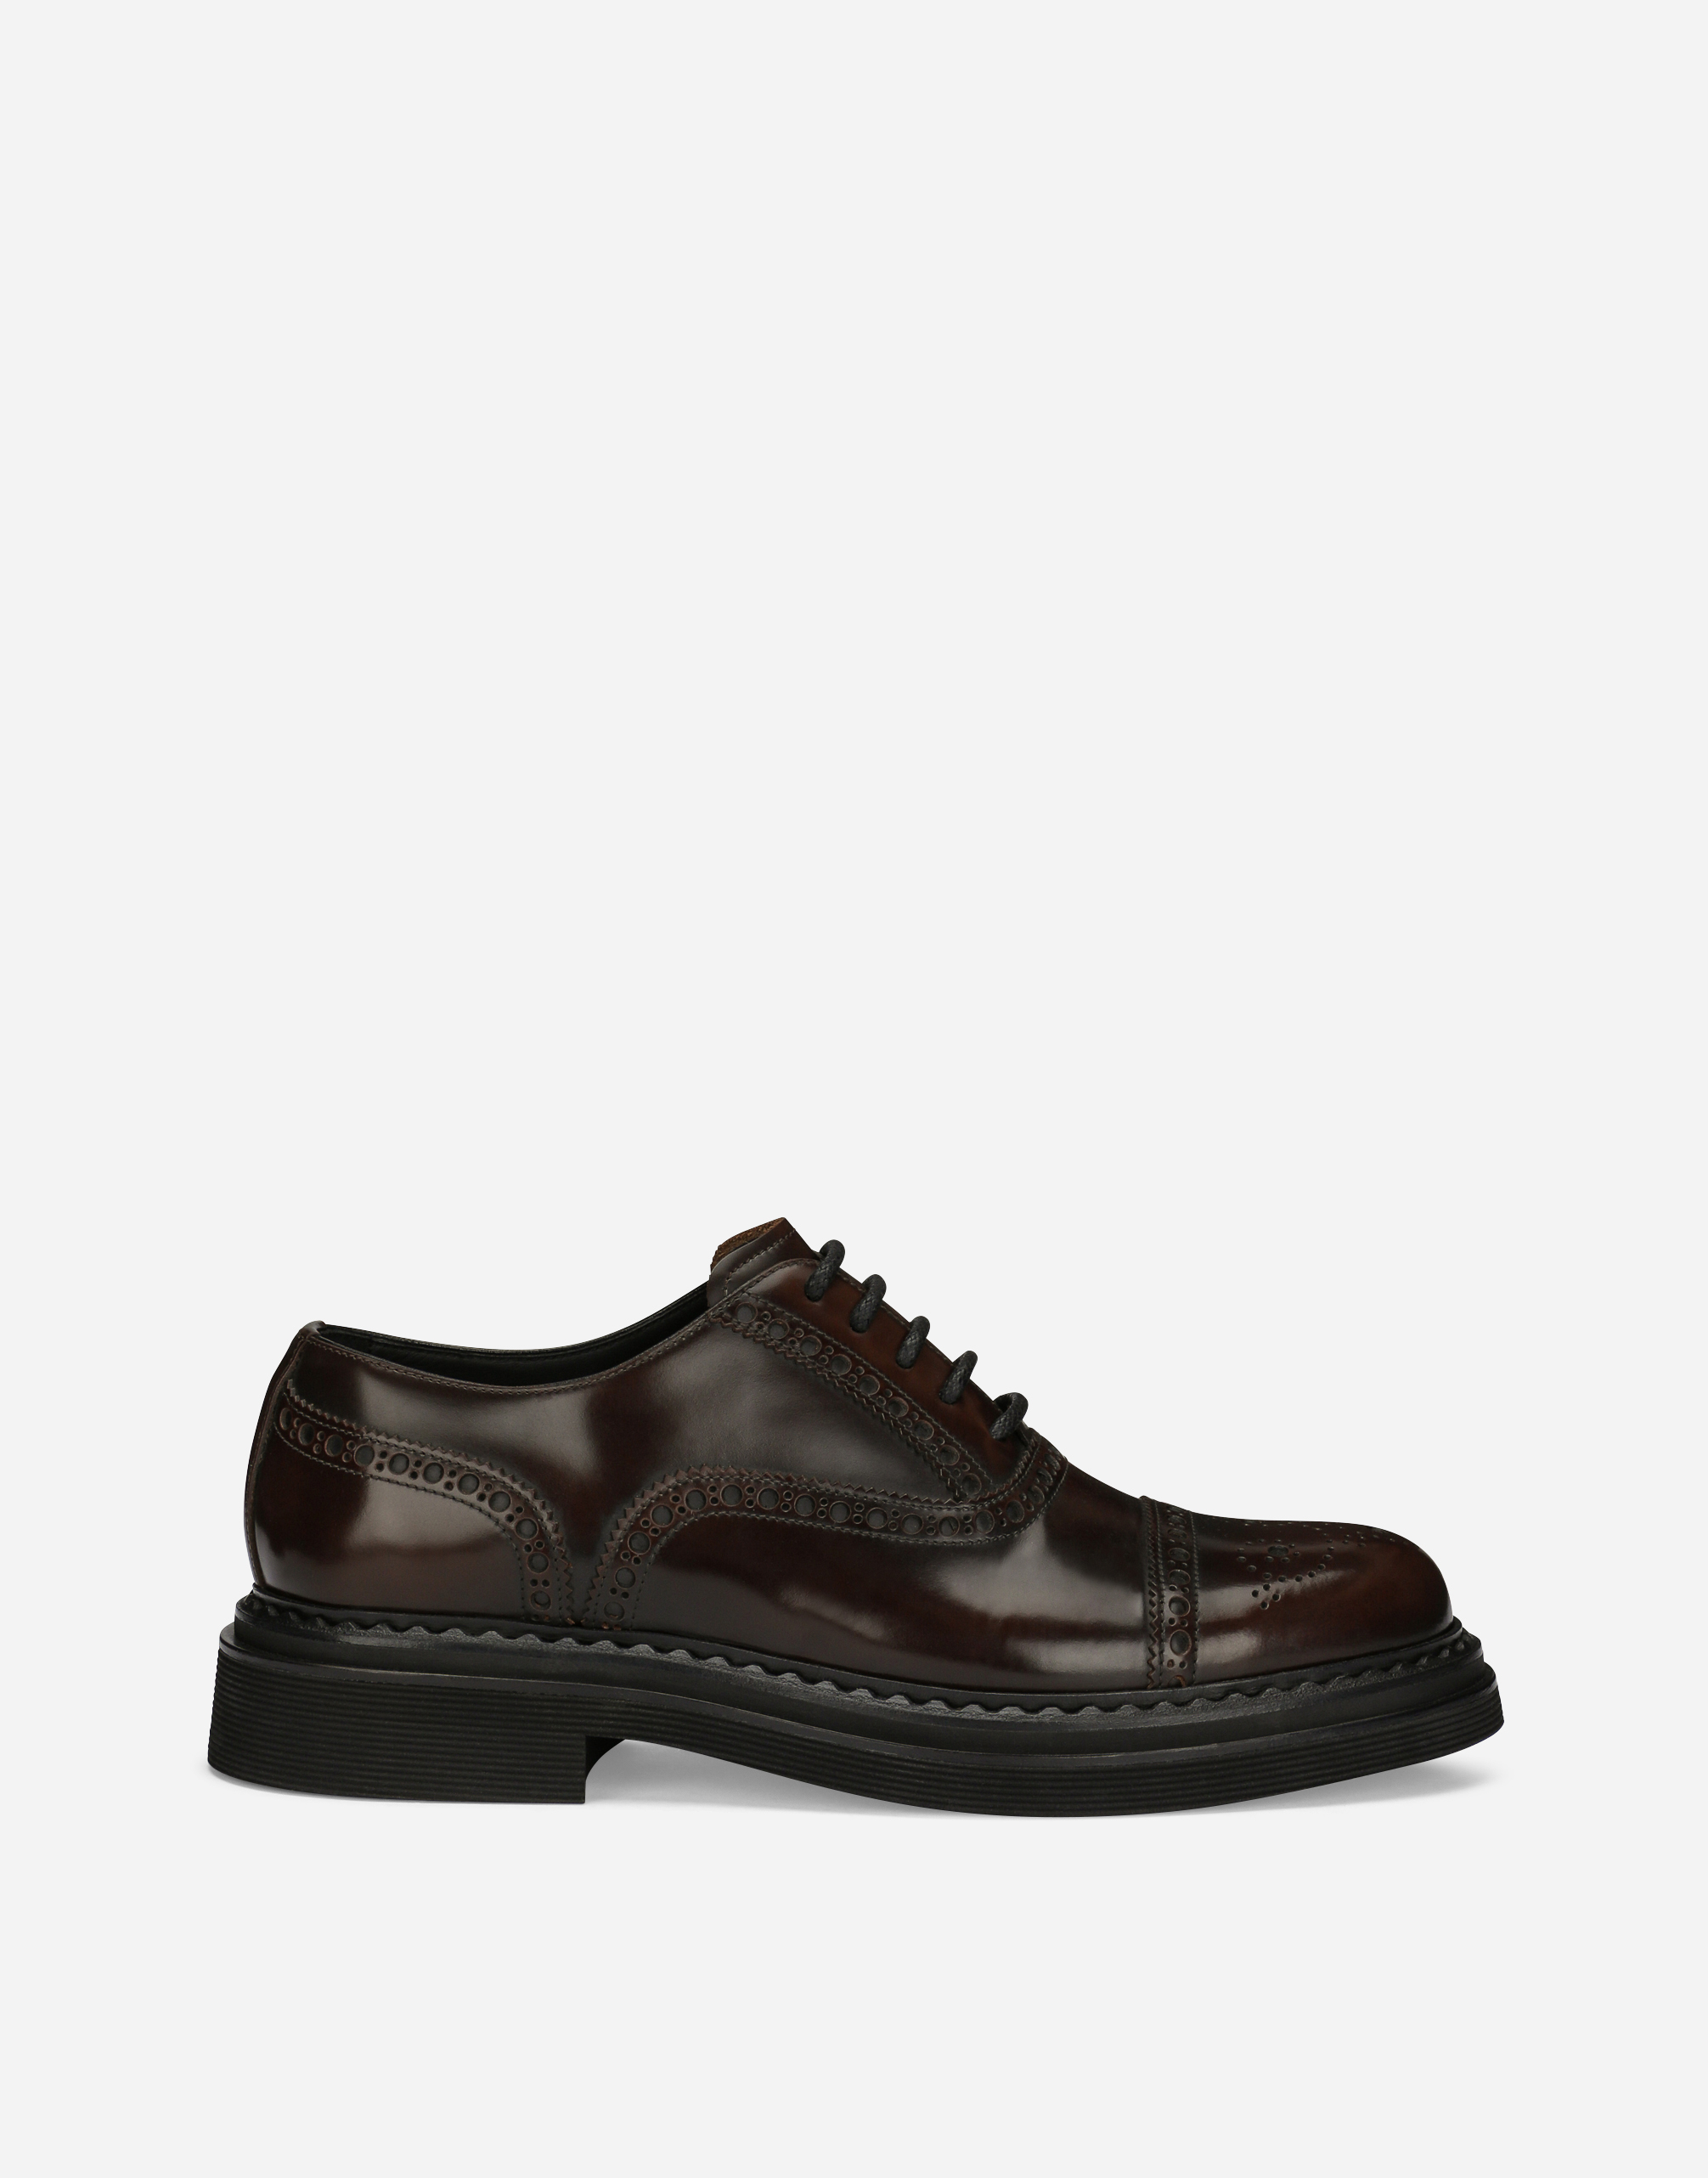 Brushed calfskin Oxfords in Brown